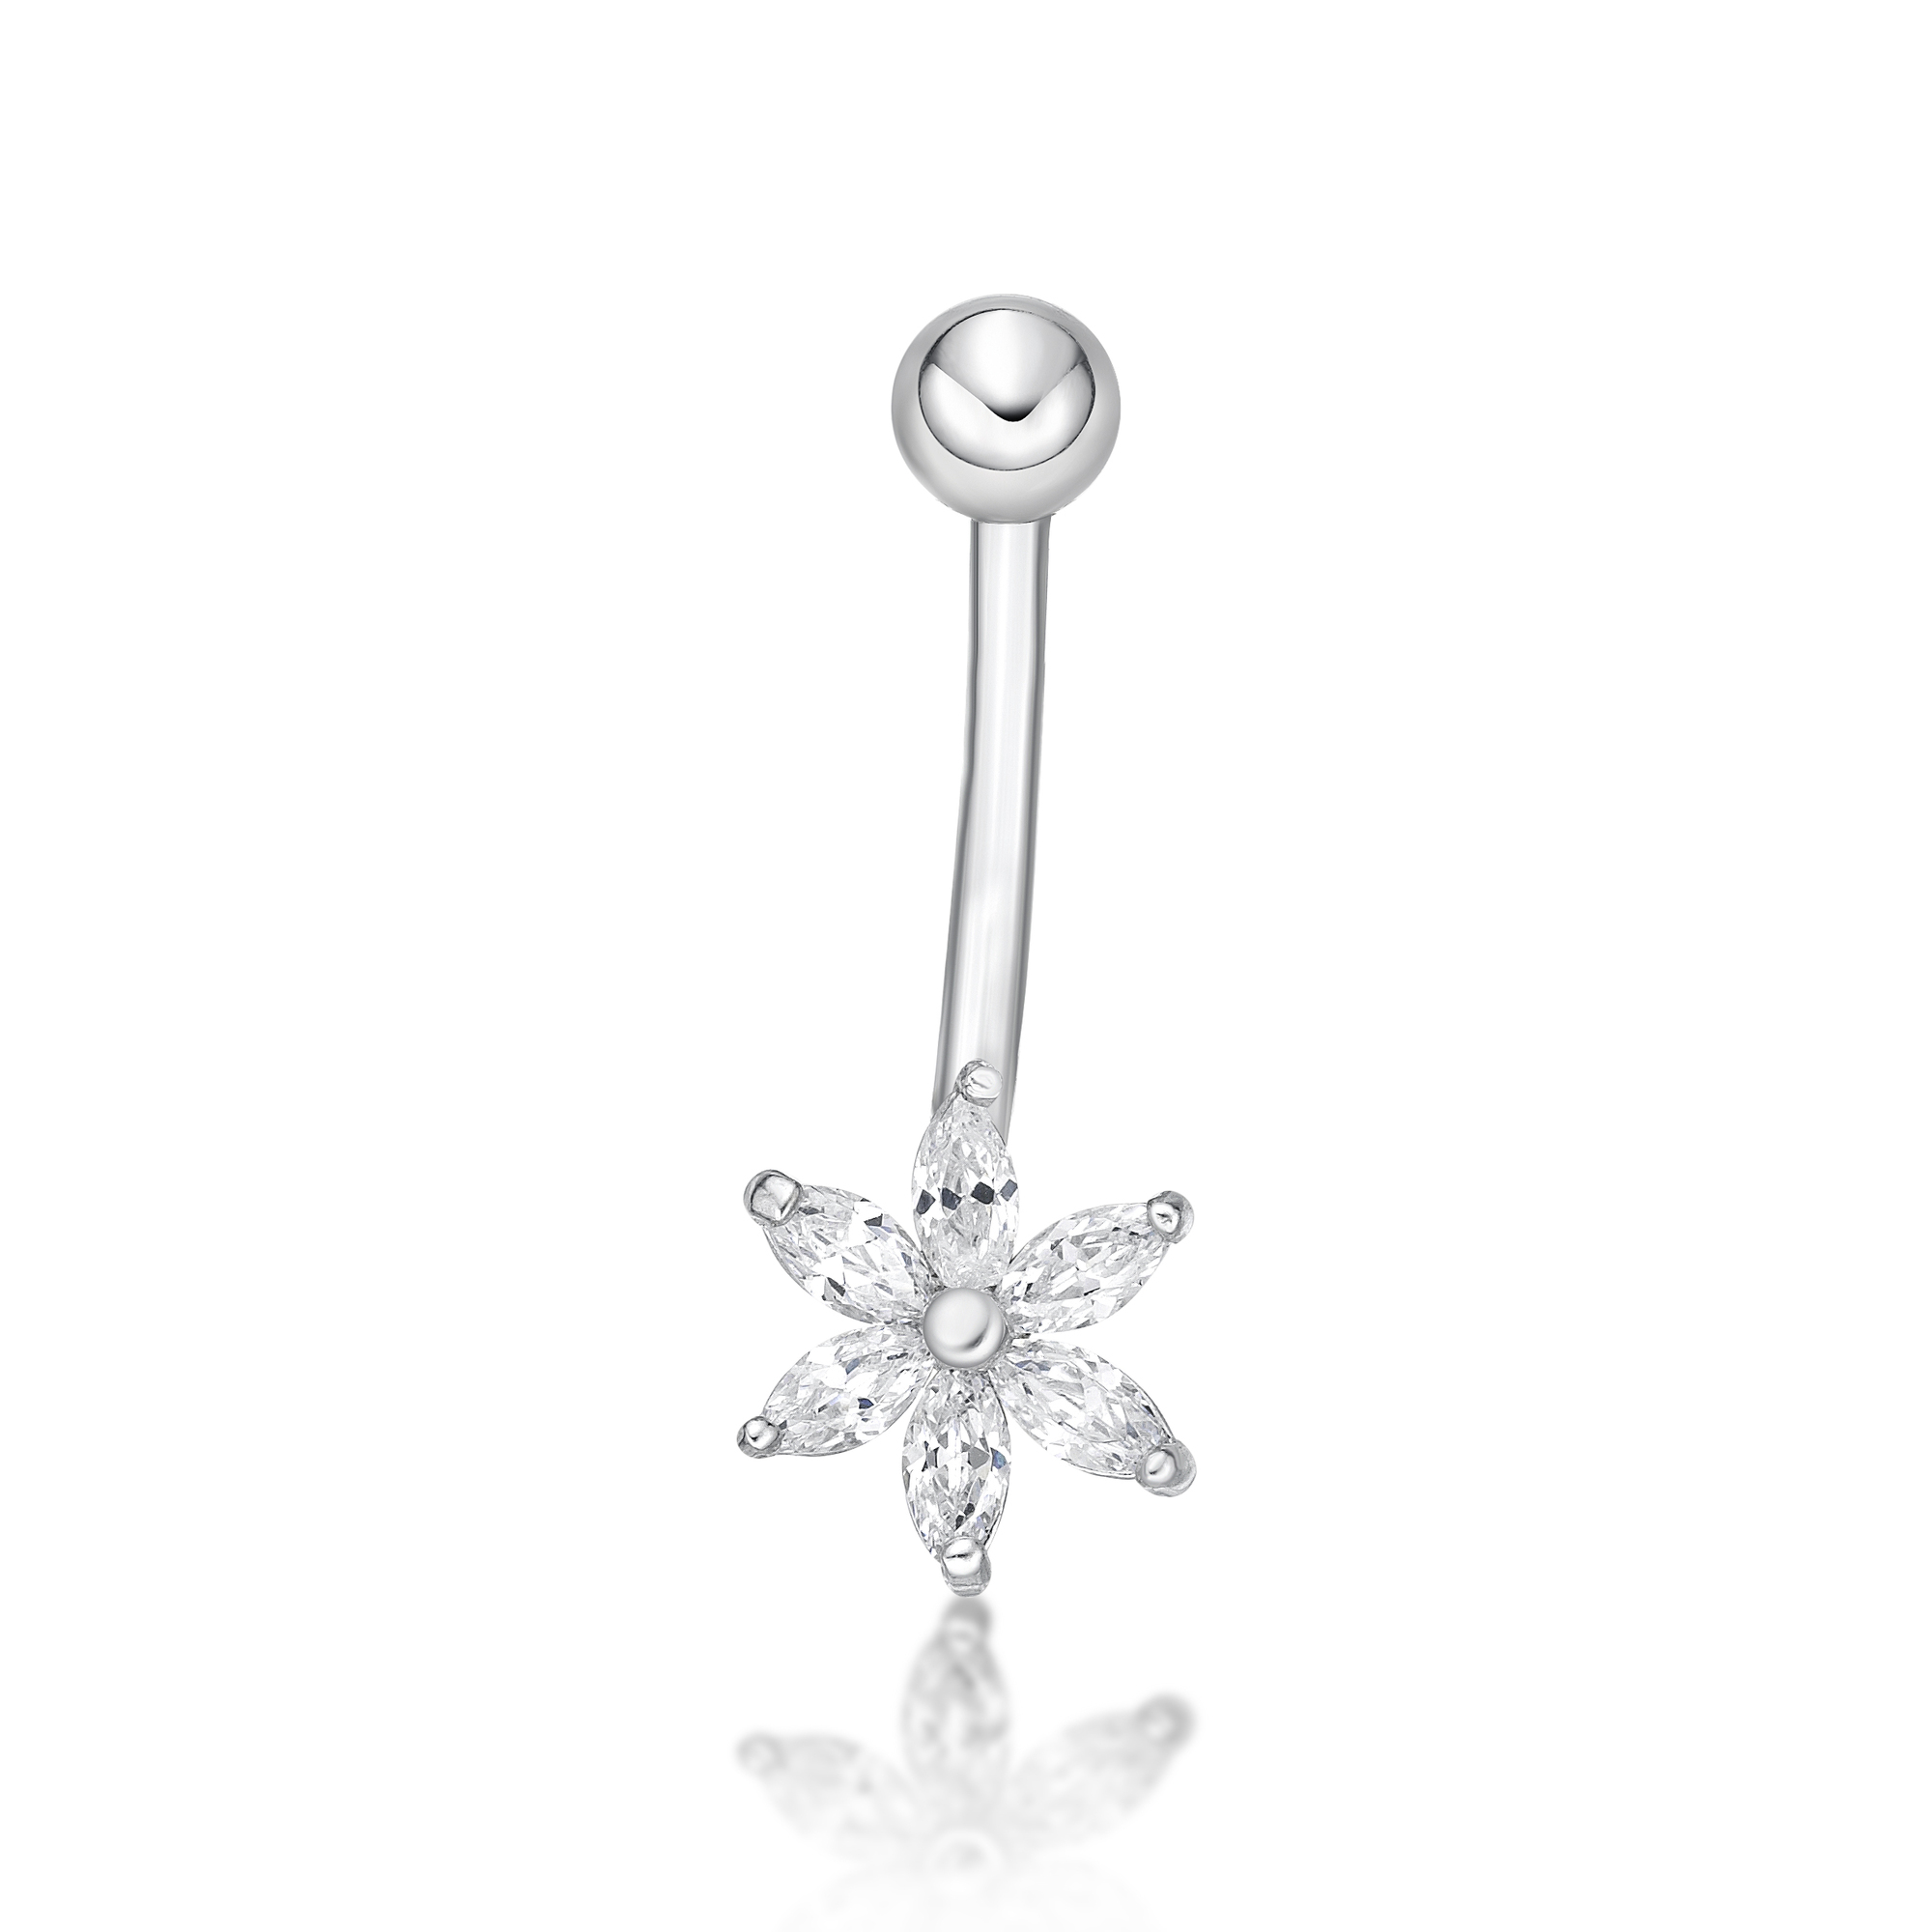 48613-belly-ring-the-piercer-white-gold-cubic-zirconia-48613-4.jpg